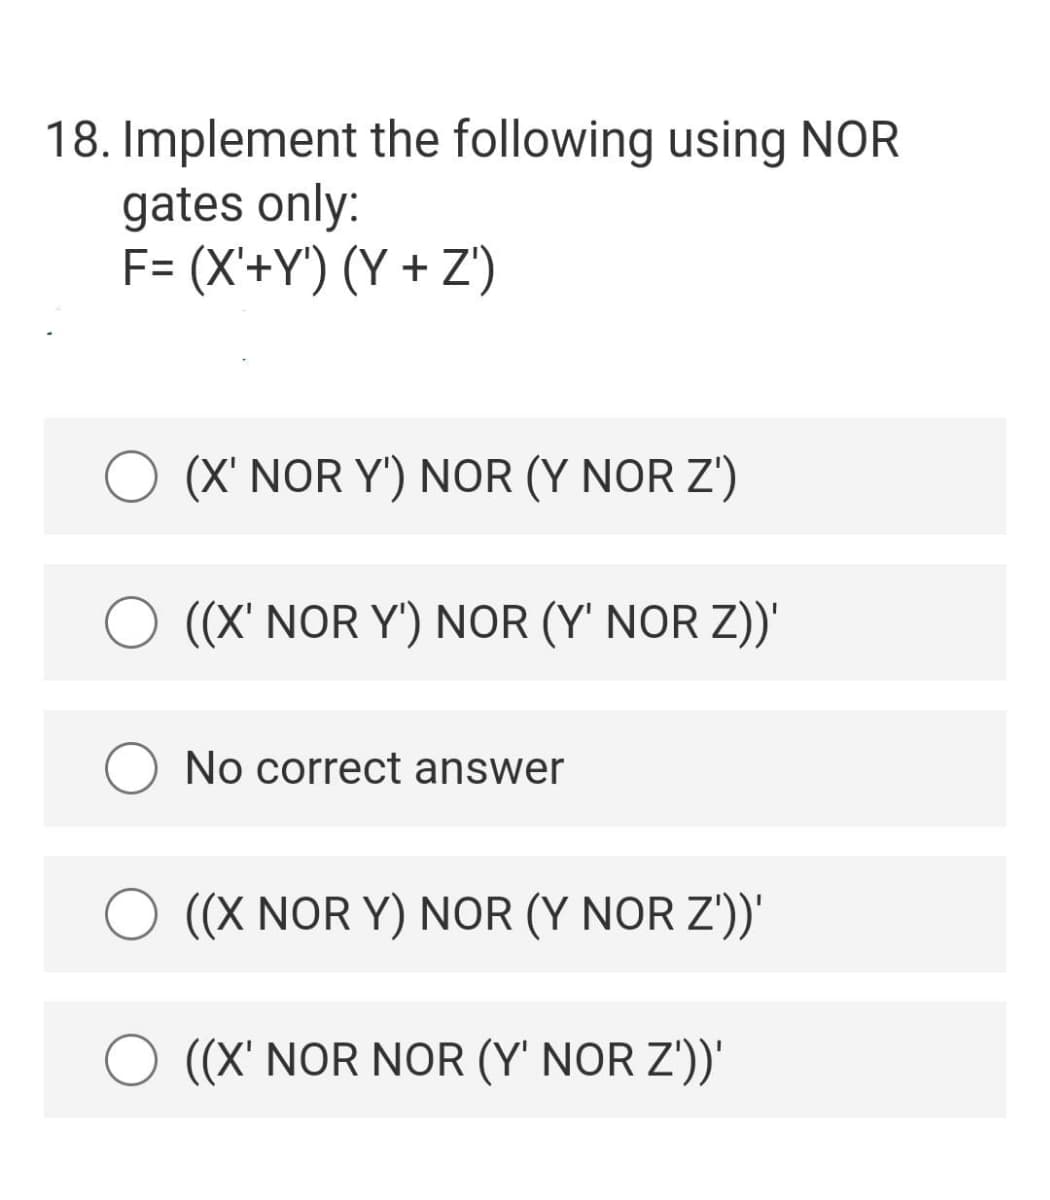 18. Implement the following using NOR
gates only:
F= (X'+Y') (Y + Z')
(X' NOR Y') NOR (Y NOR Z')
O ((X' NOR Y") NOR (Y' NOR Z))'
No correct answer
((X NOR Y) NOR (Y NOR Z'))'
O ((X' NOR NOR (Y' NOR Z'))'
